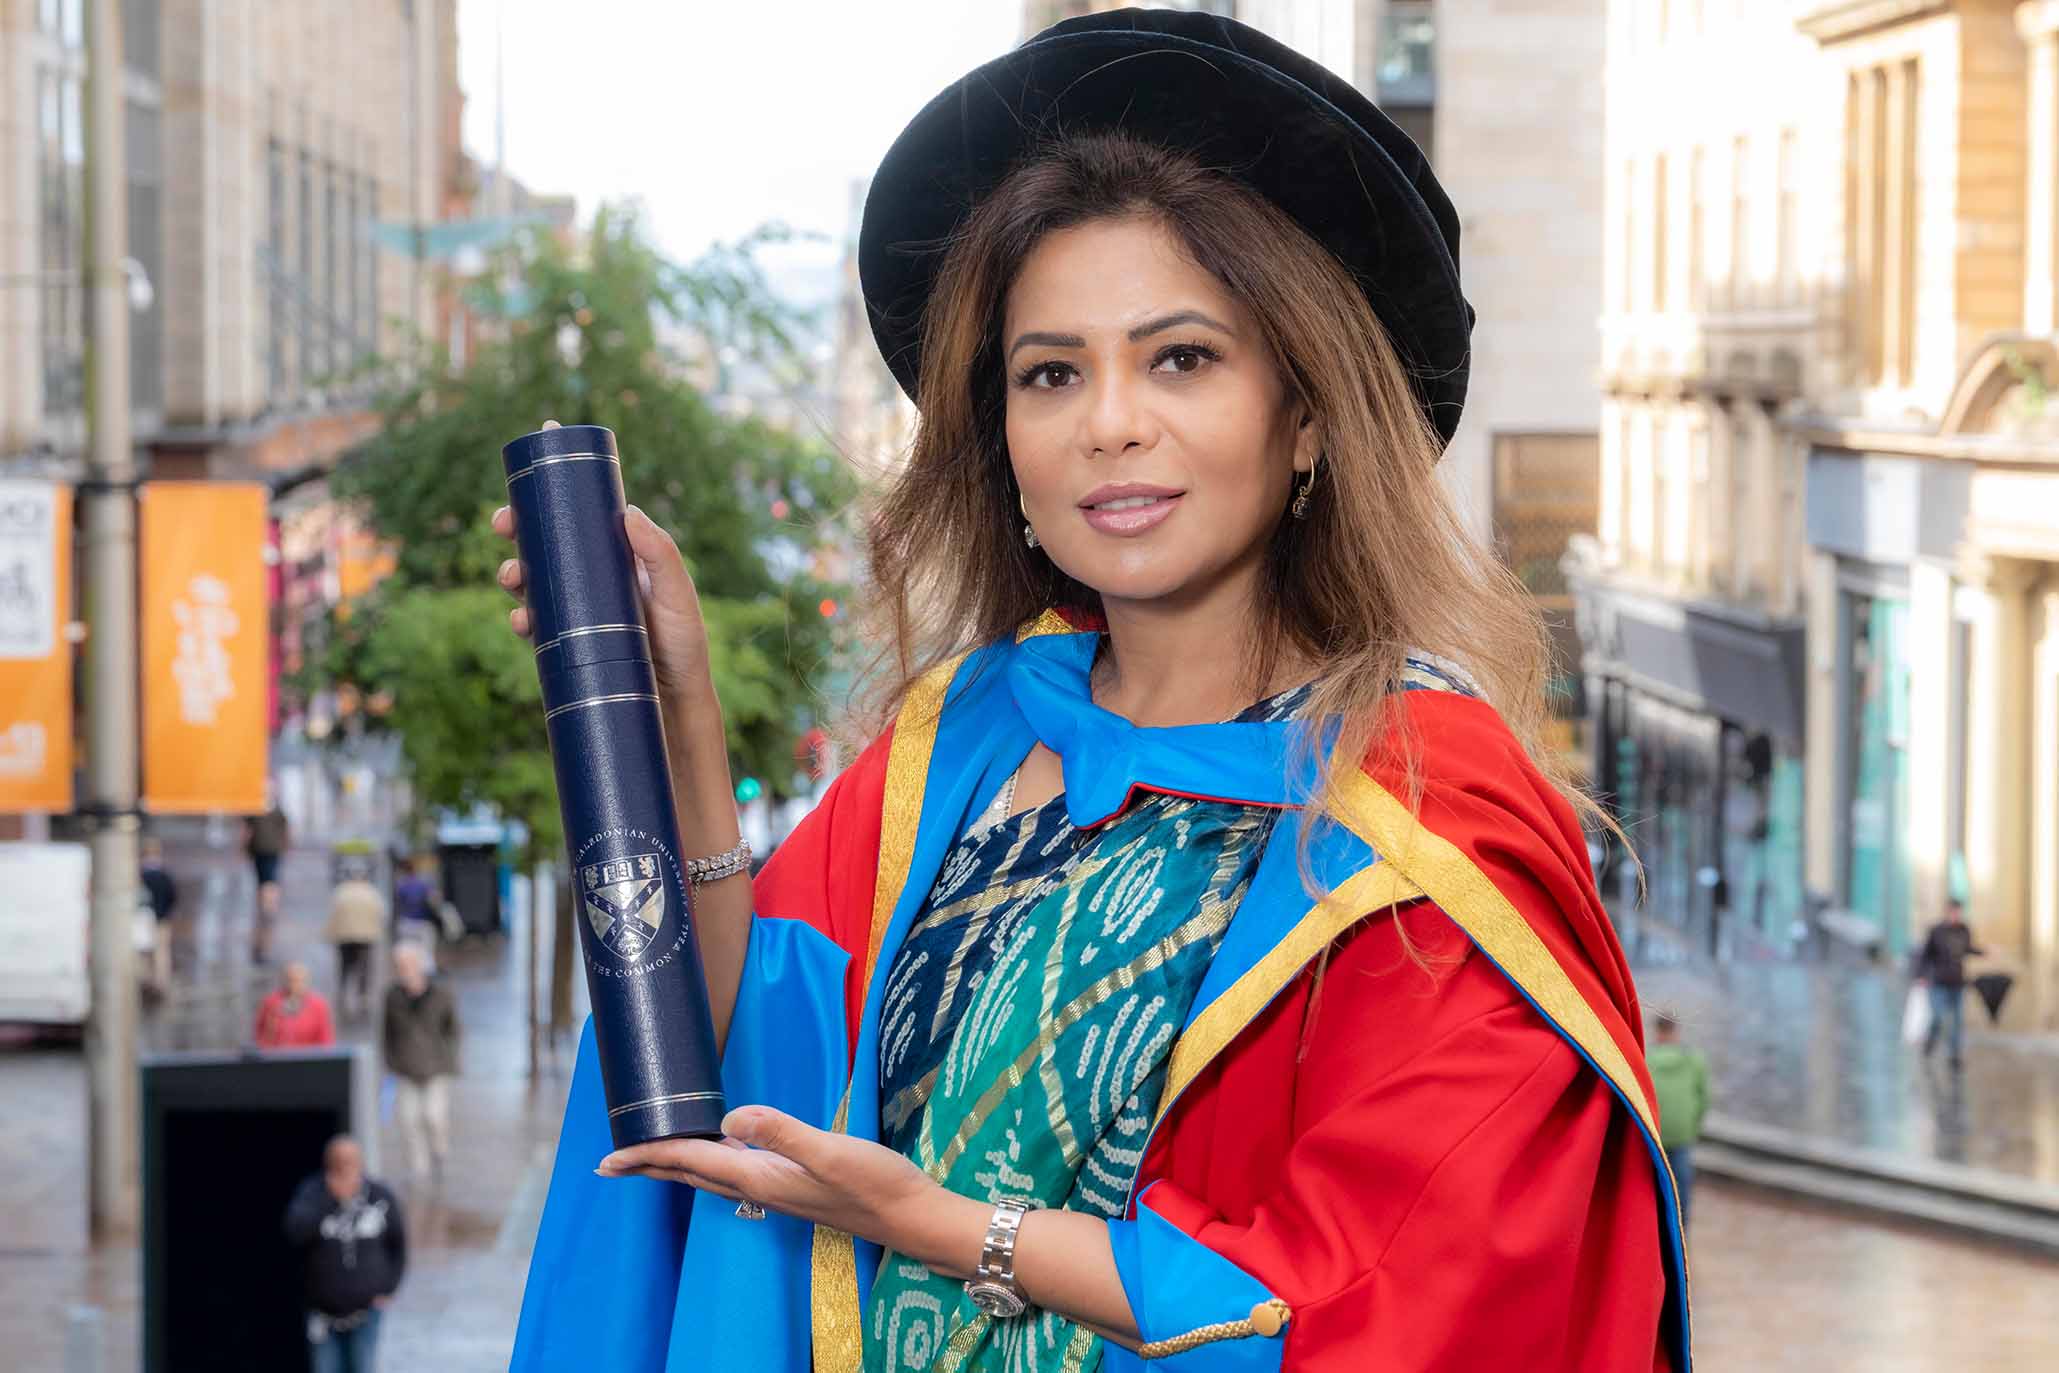 GCU Honorary Graduate Dr Poonam Gupta wearing her graduation hood and hat and holding a degree container.